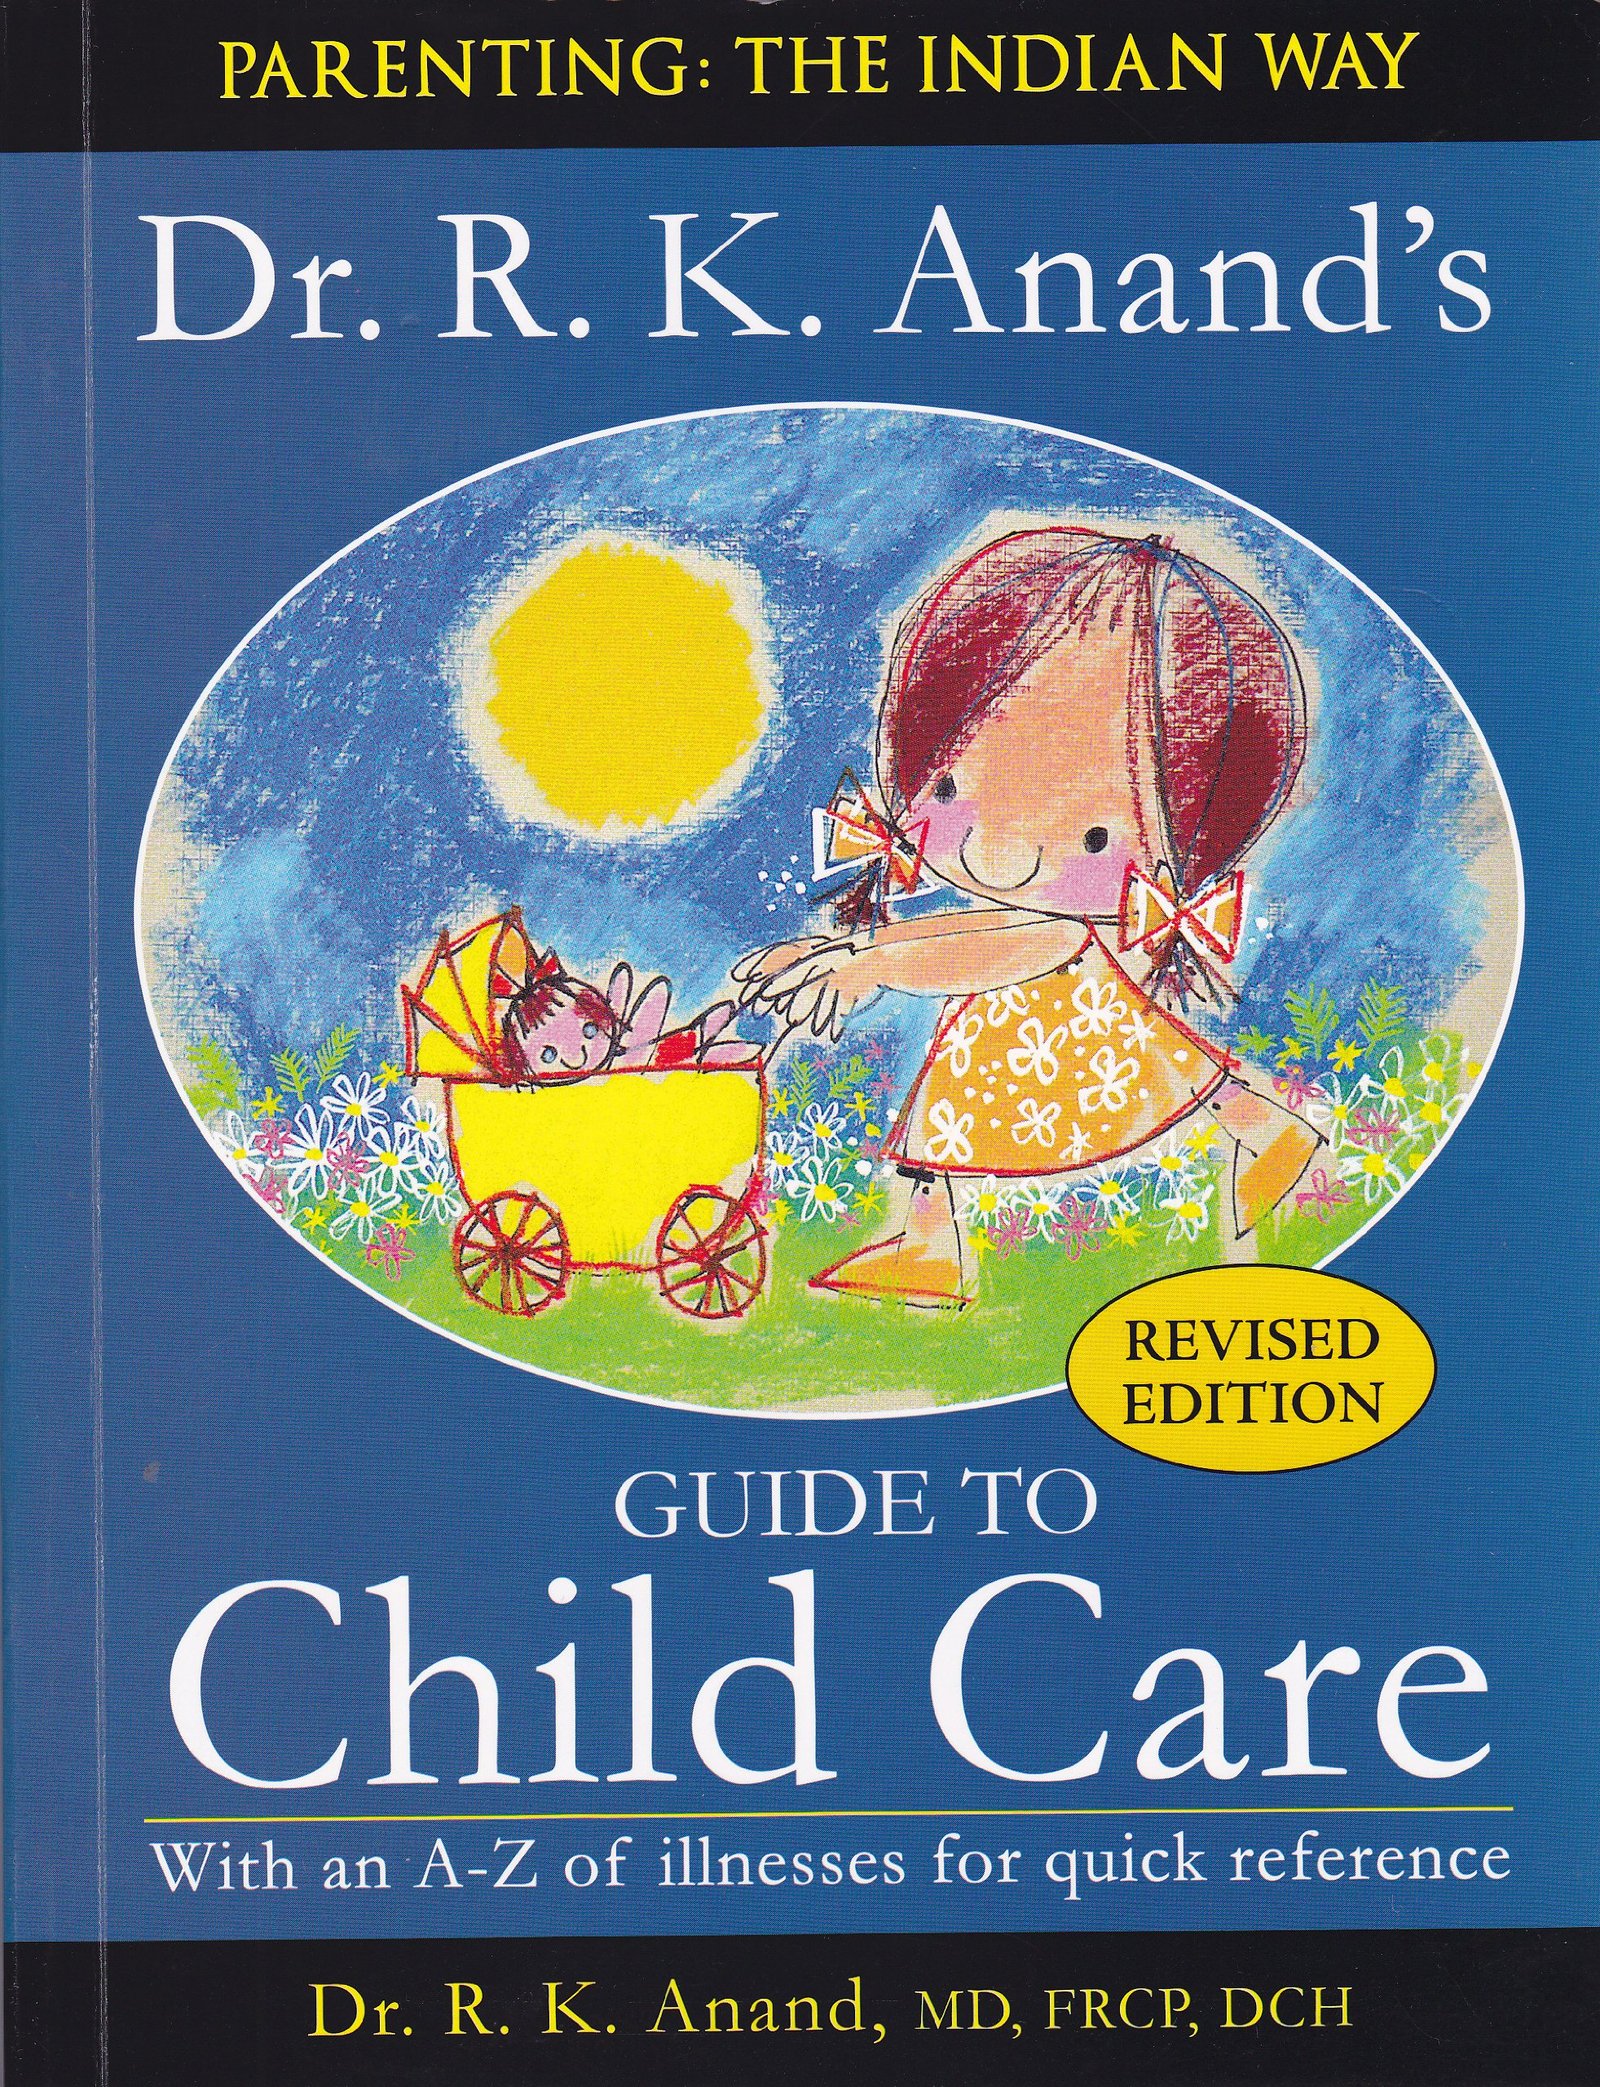 Dr. R.K. Anand’s Guide to Child Care-Book Review